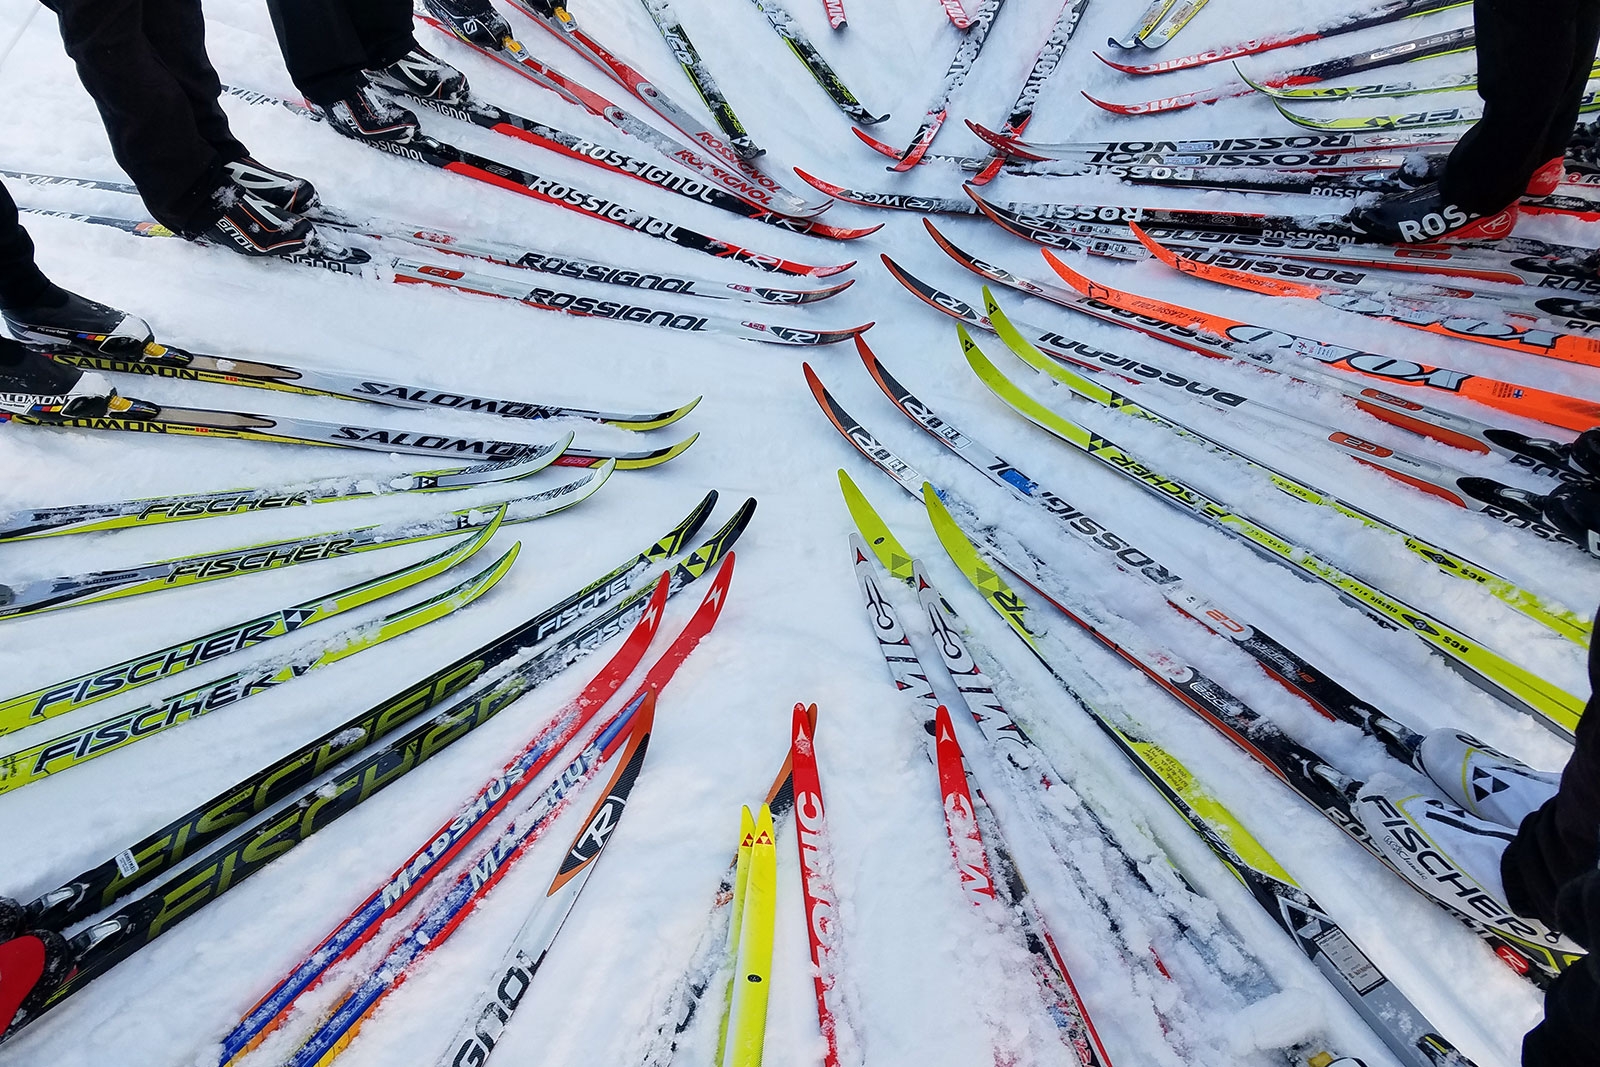 Make it possible for your customers to reserve the cross country ski equipment rental online.